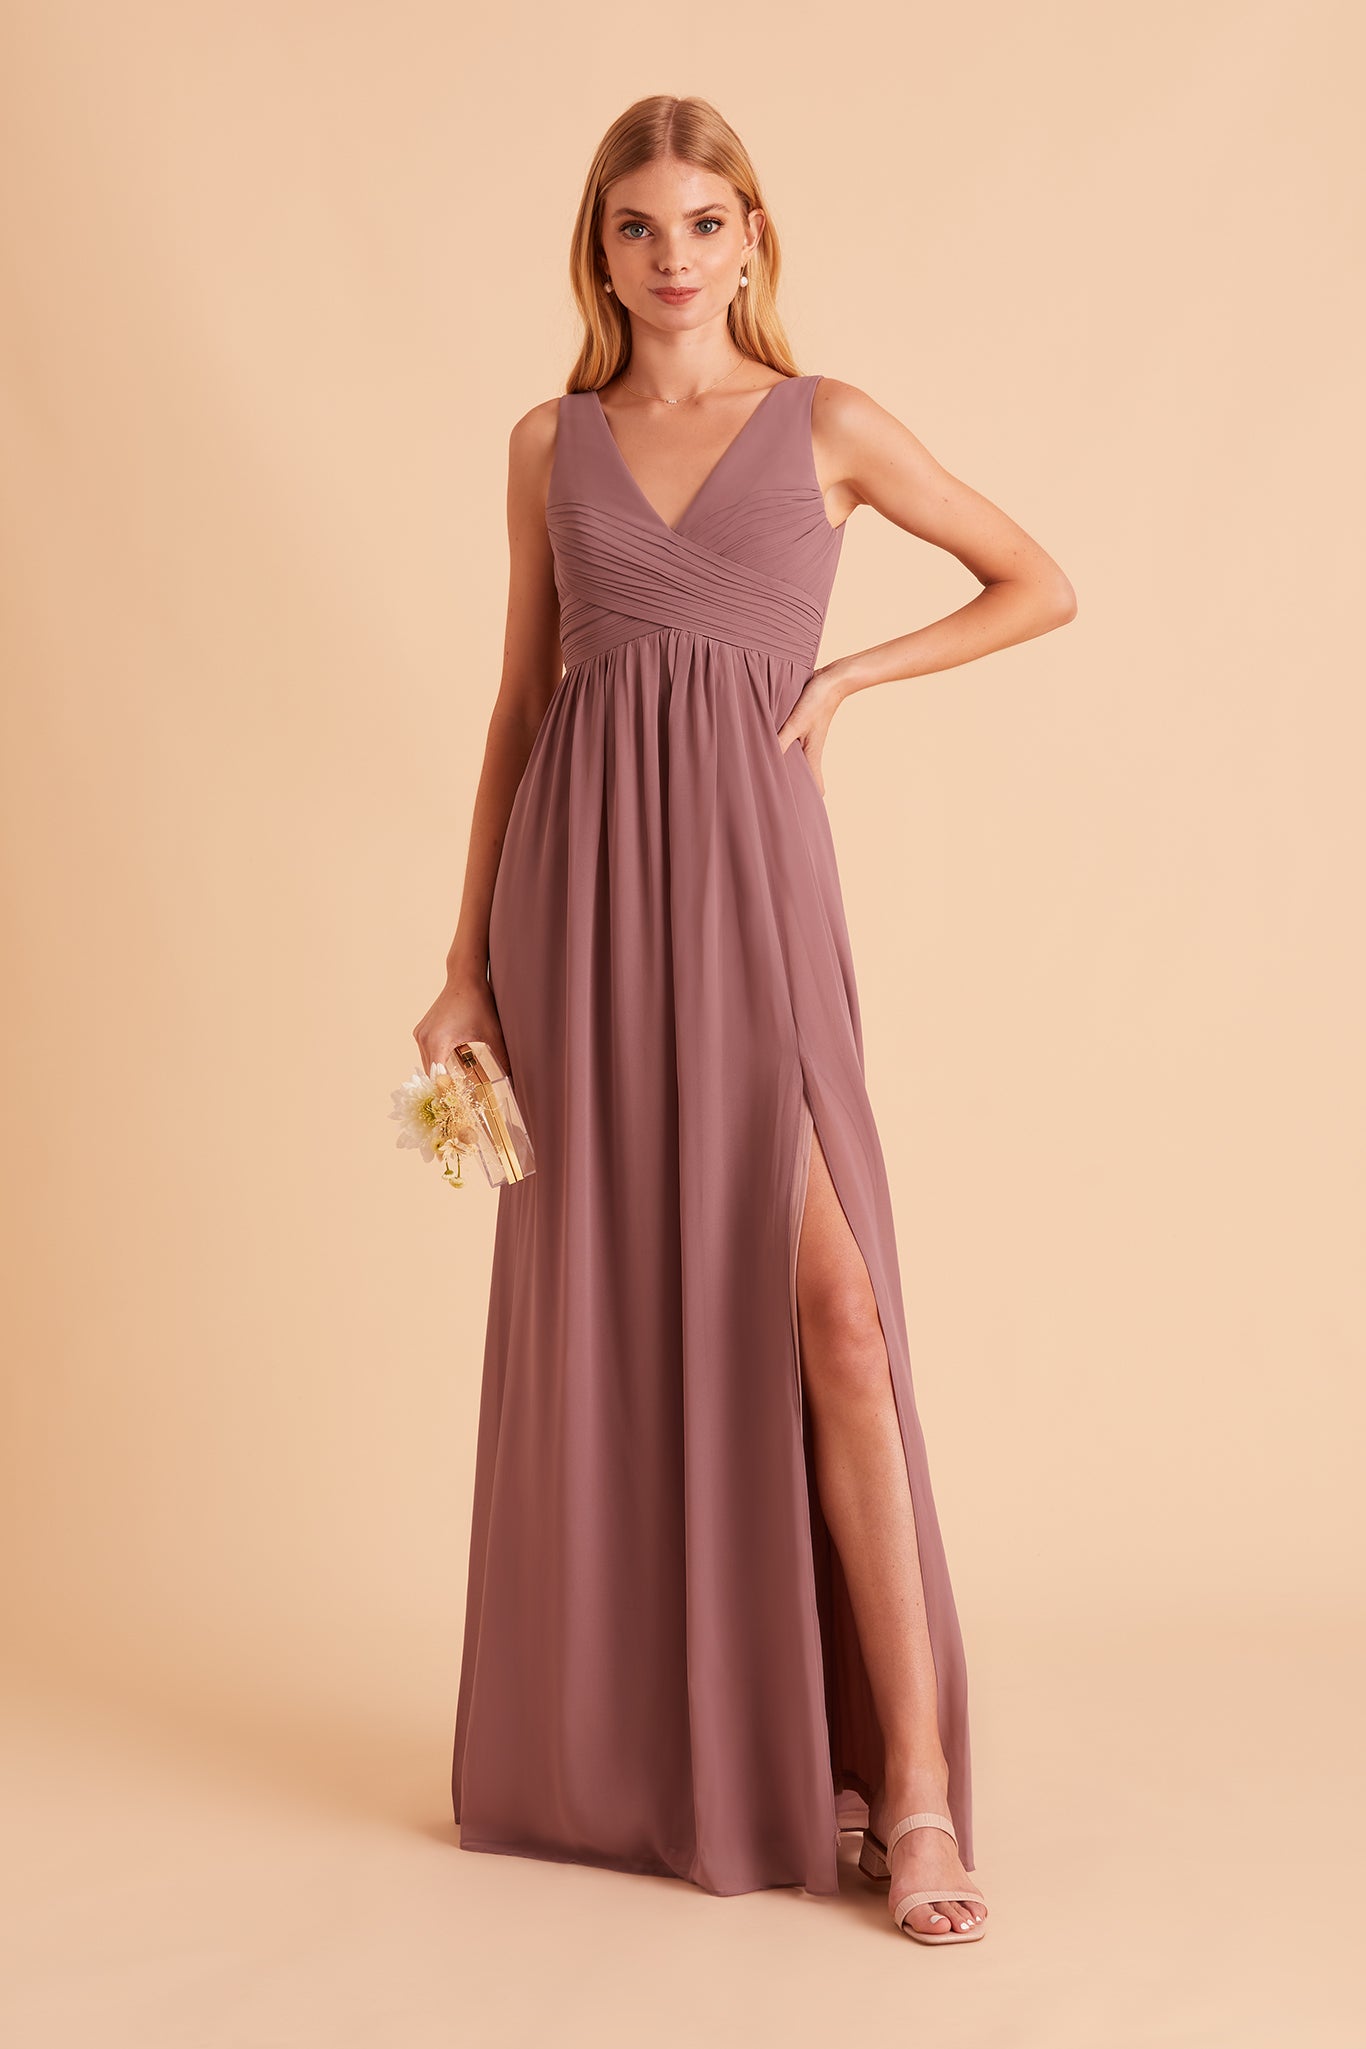 Laurie Empire bridesmaid dress with slit in dark mauve chiffon by Birdy Grey, front view